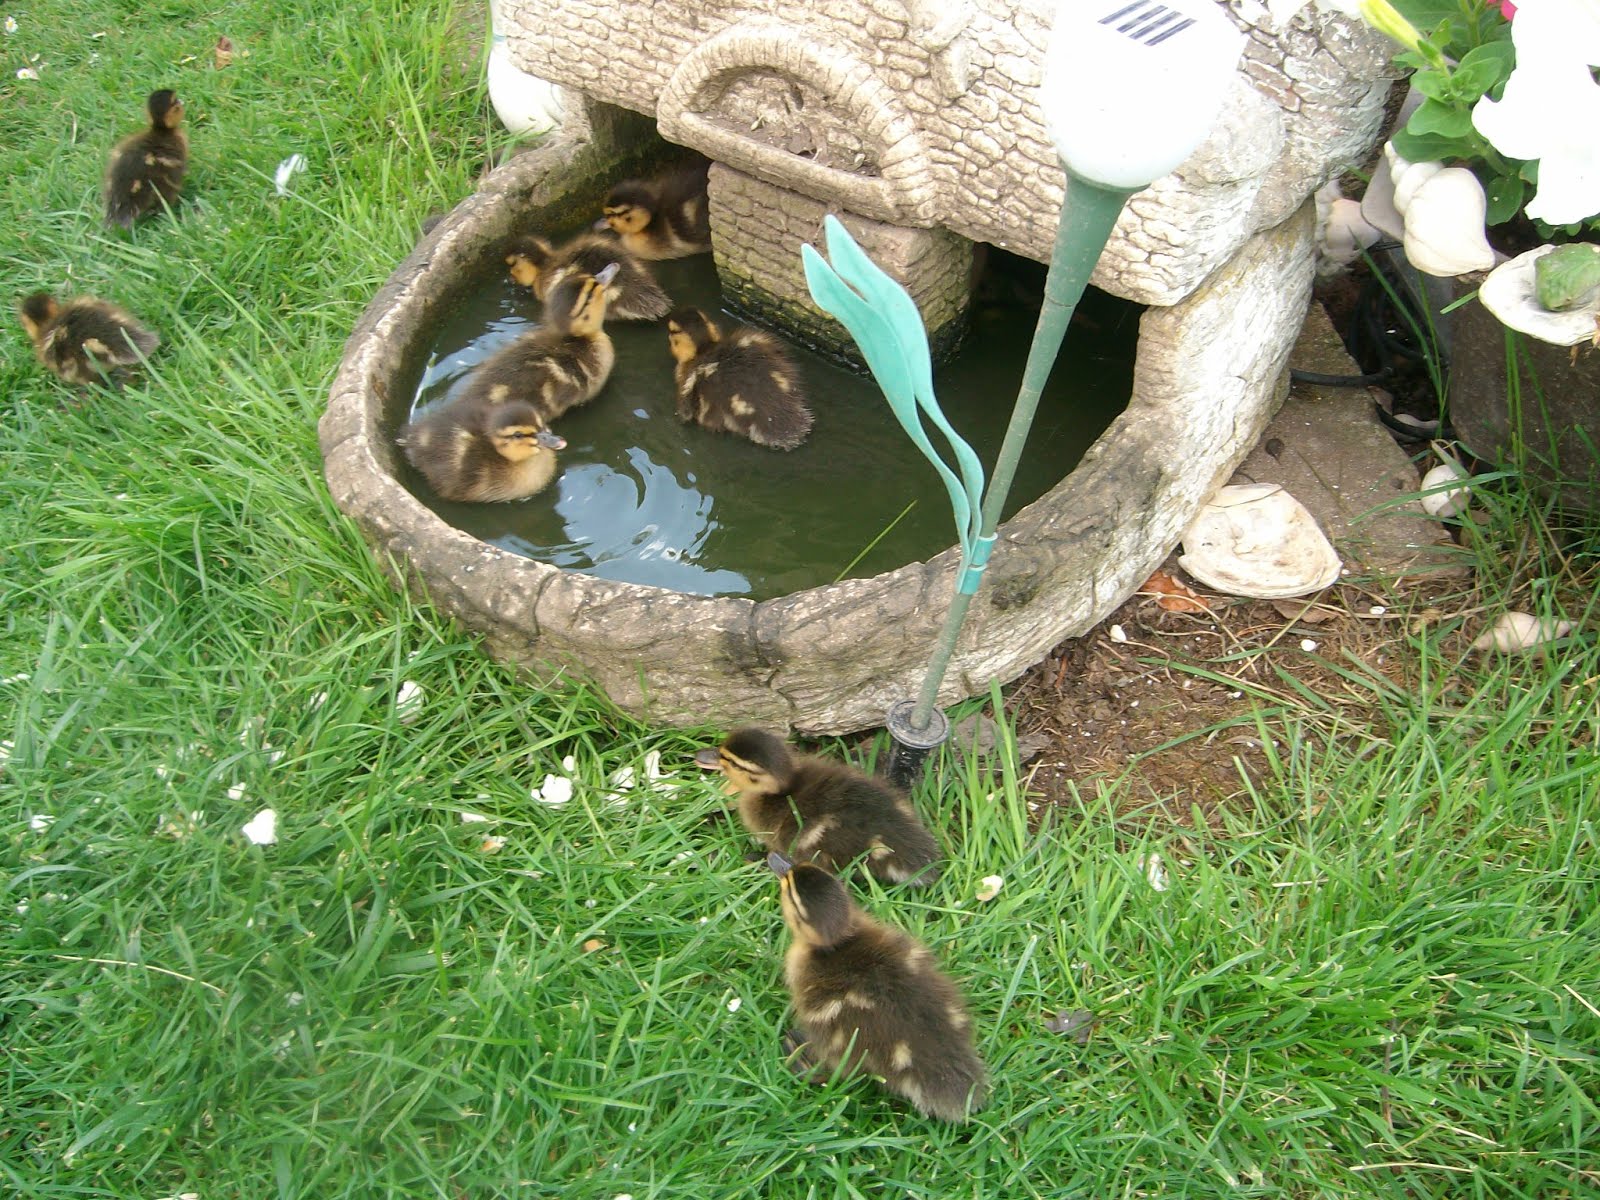 Safe place for ducklings to swim